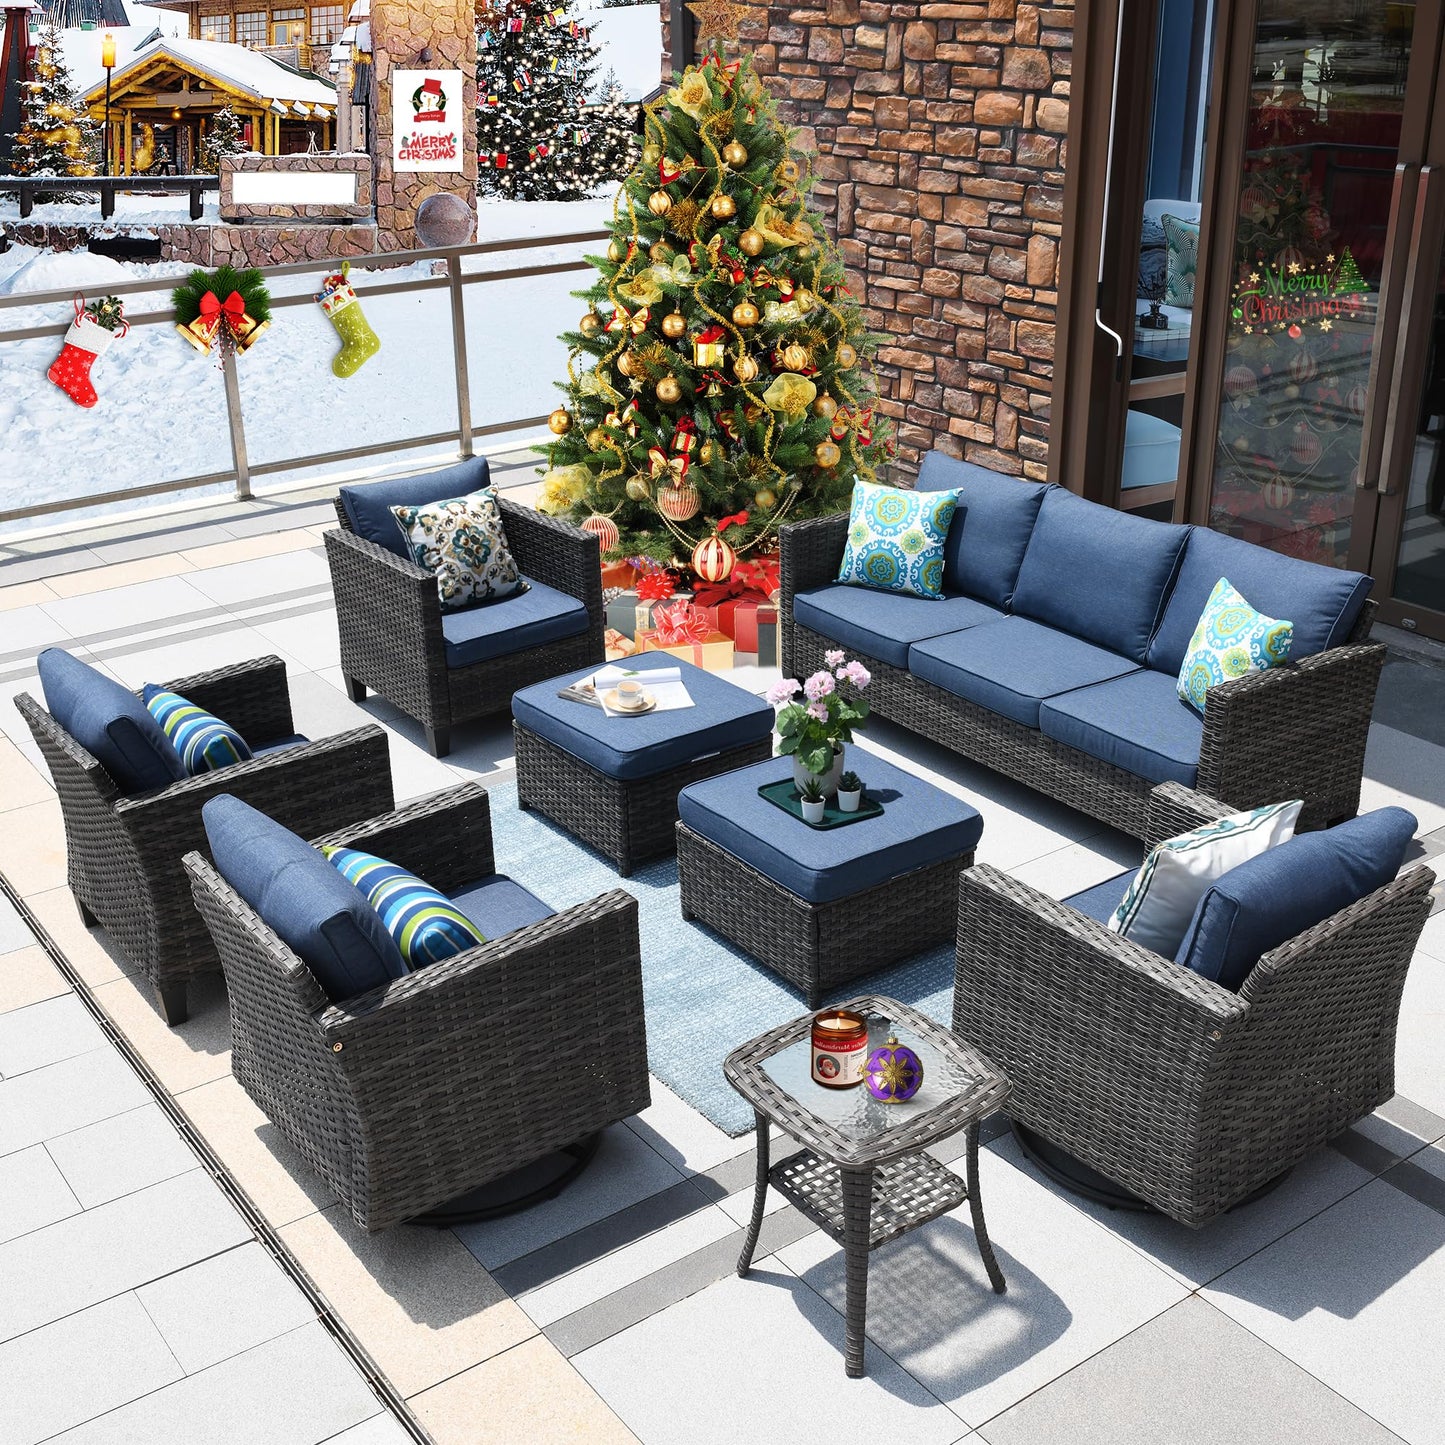 ovios Patio Furniture Set 8 Pieces Outdoor Wicker Rocking Swivel Chairs Sectional Sofa Set with Single Chairs High Back Rattan Sofa for Yard Garden Porch, Denim Blue